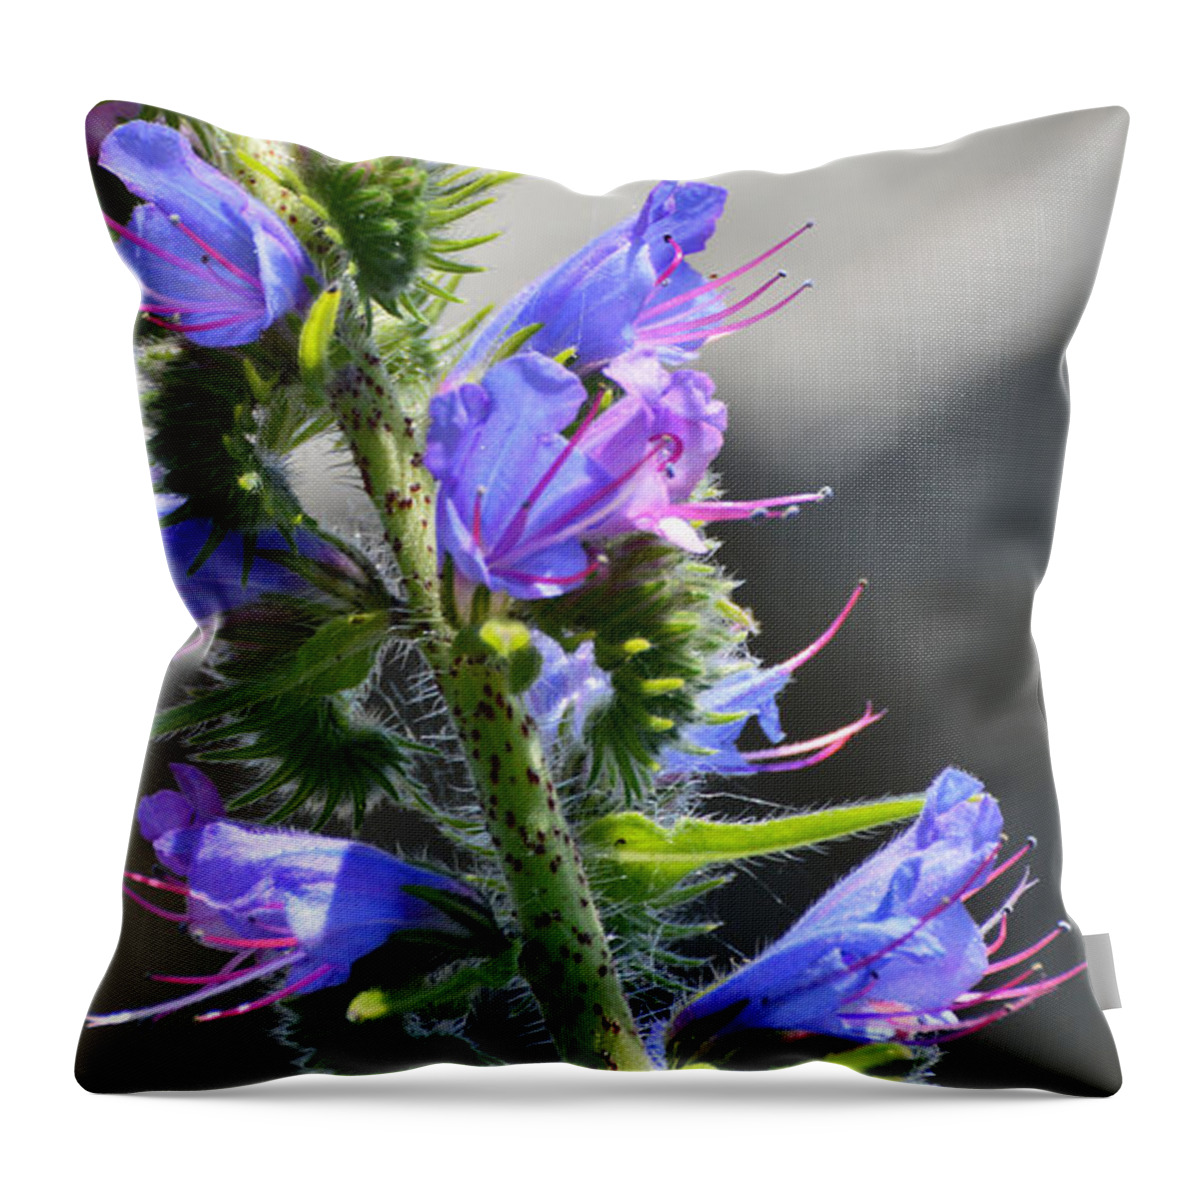 Flower Throw Pillow featuring the photograph Hairy Flower by Lyle Crump